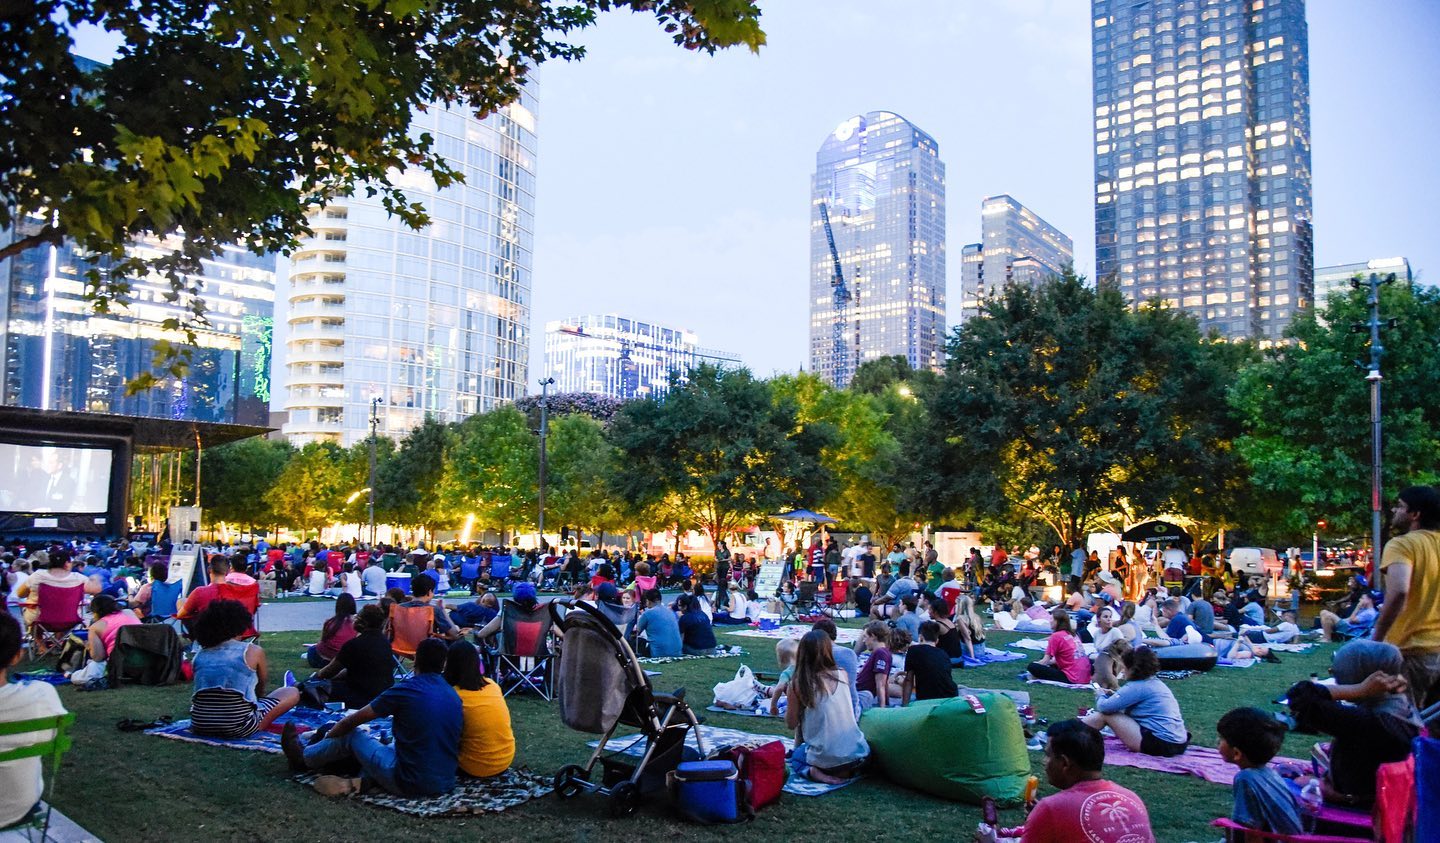 Movies in the Park at Klyde Warren Park